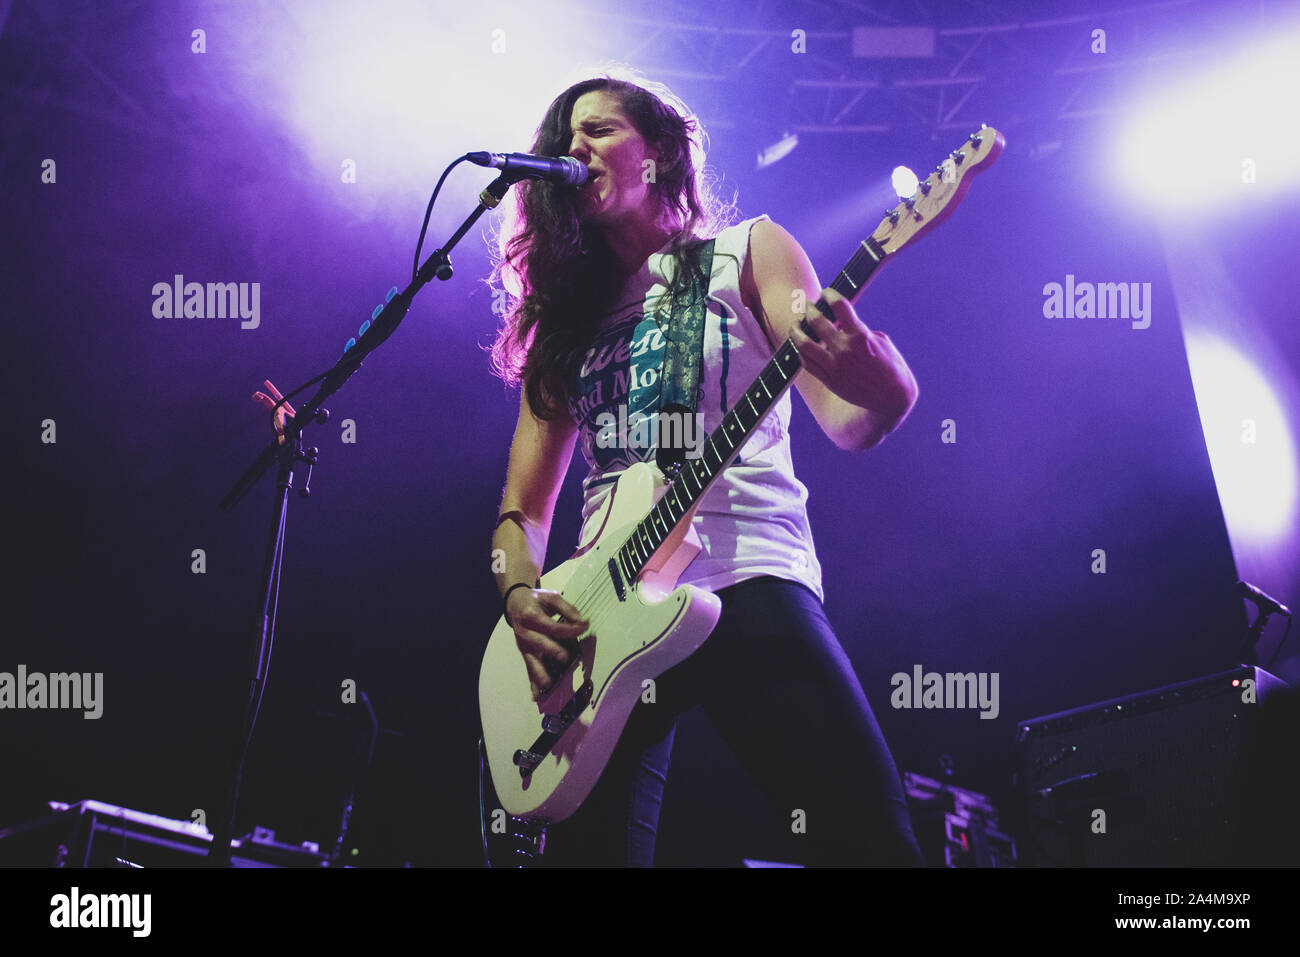 FABRIQUE, MILANO, ITALY - 2019/10/14: Gina Gleason of the american band Baroness performing live on stage at Fabrique, opening for Volbeat Stock Photo